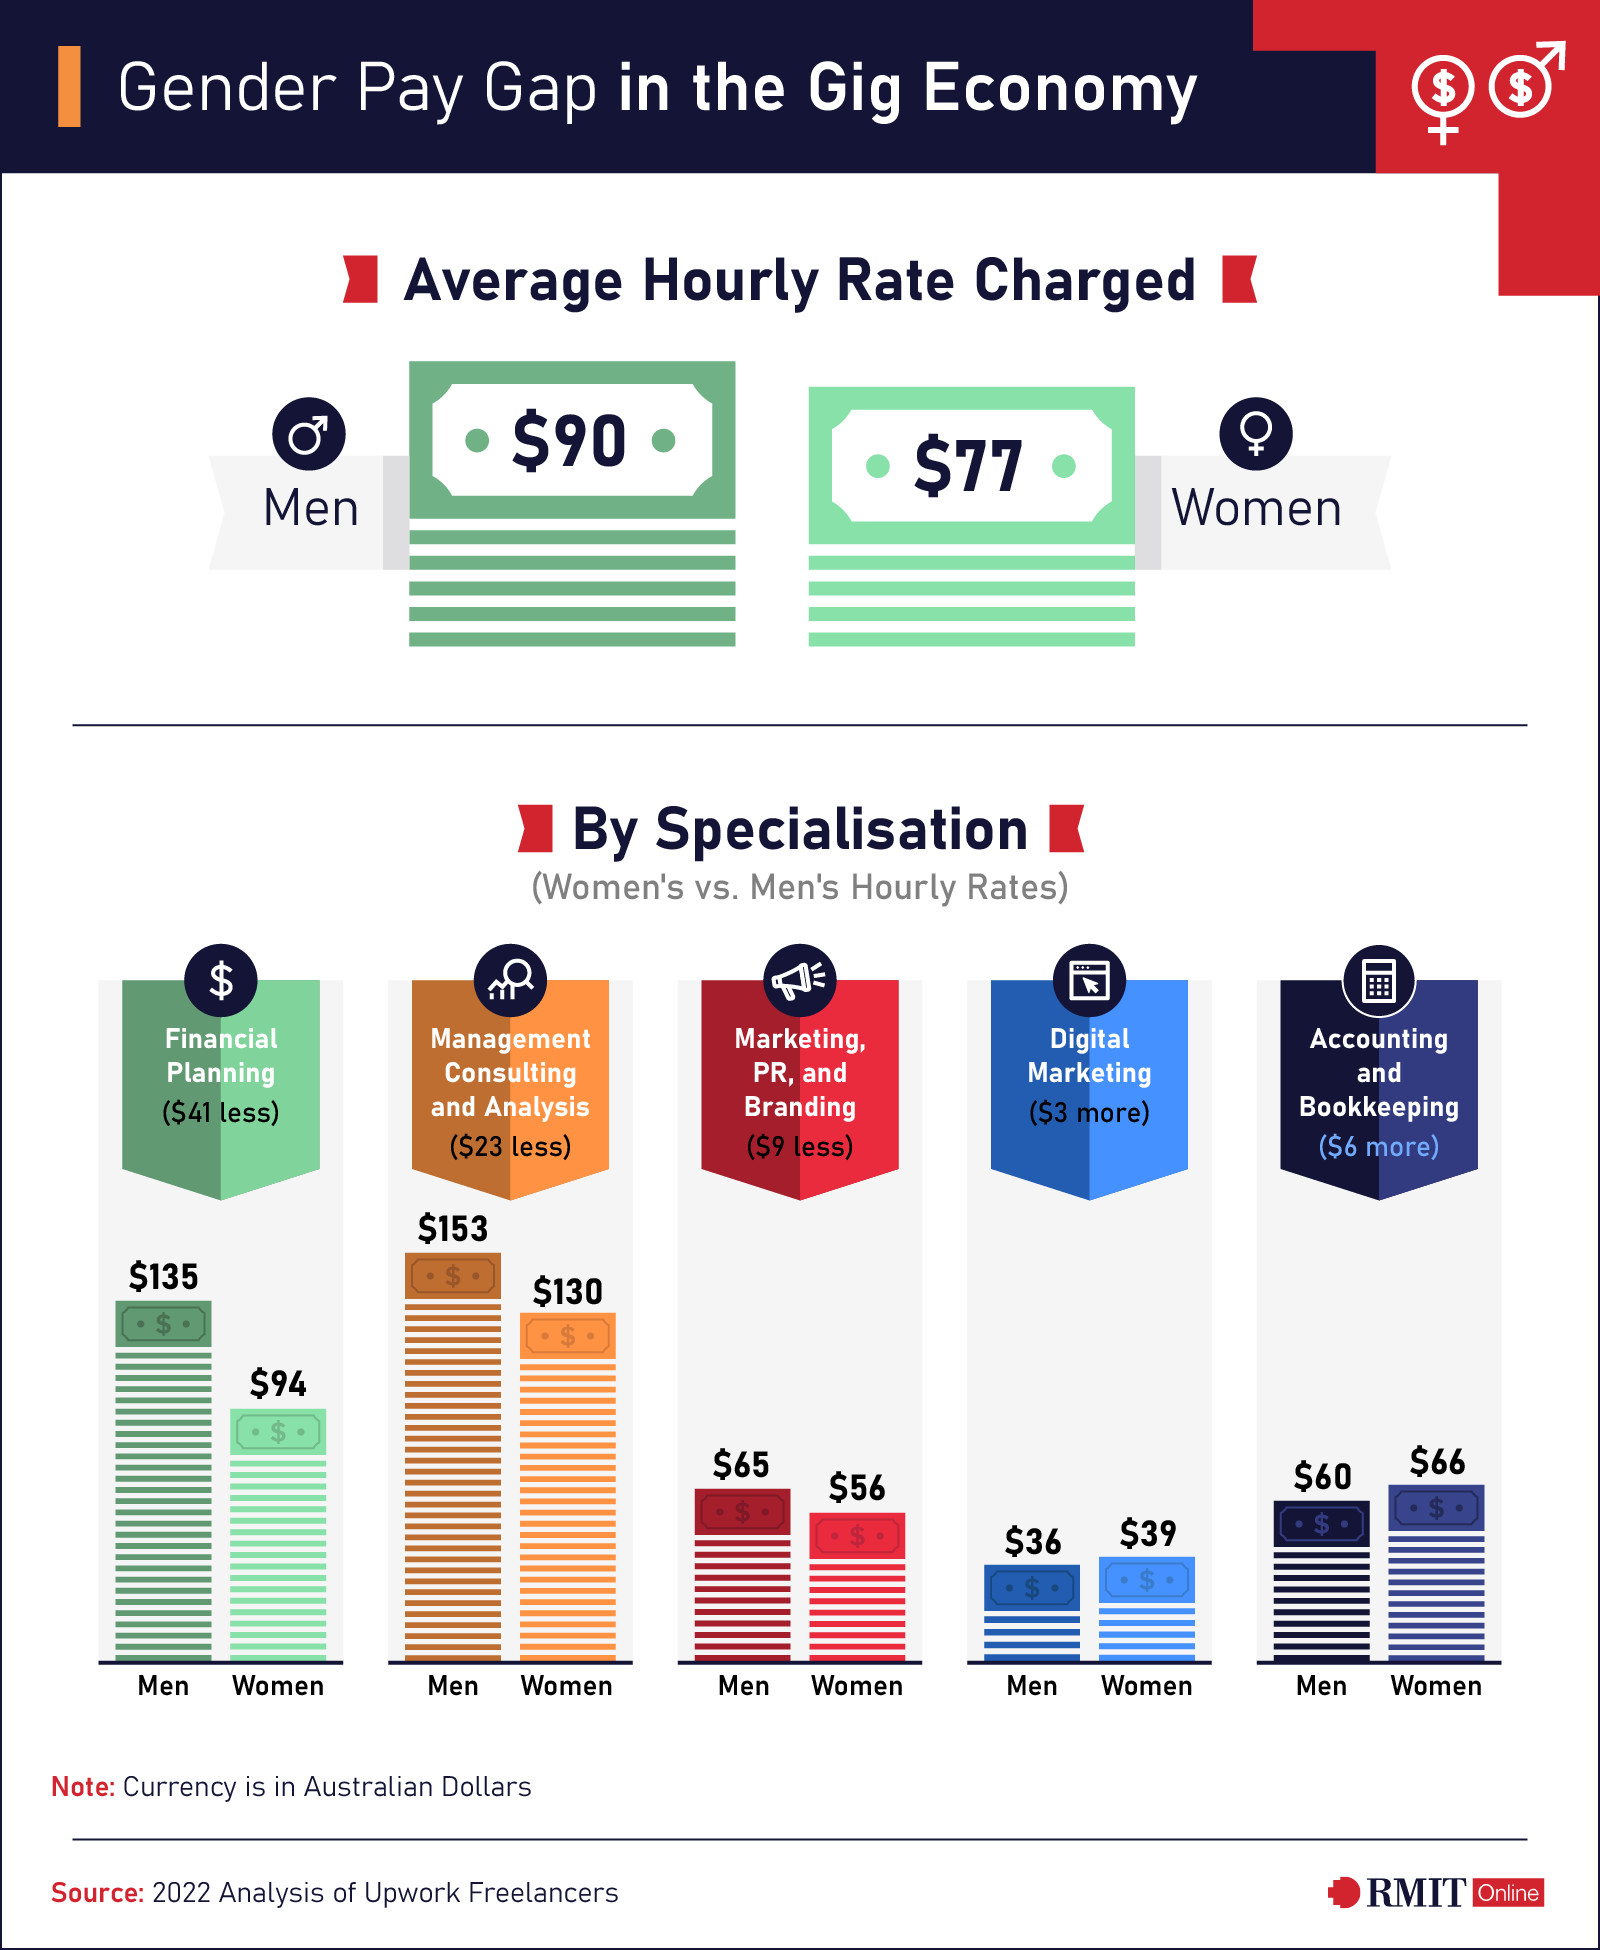 Infographic: gender pay gap in the gig economy shows how men are paid more than women, comparing women's vs men's hourly rates by specialisation: financial planning, management consulting and analysis, marketing, PR & branding, digital marketing and accounting and bookkeeping